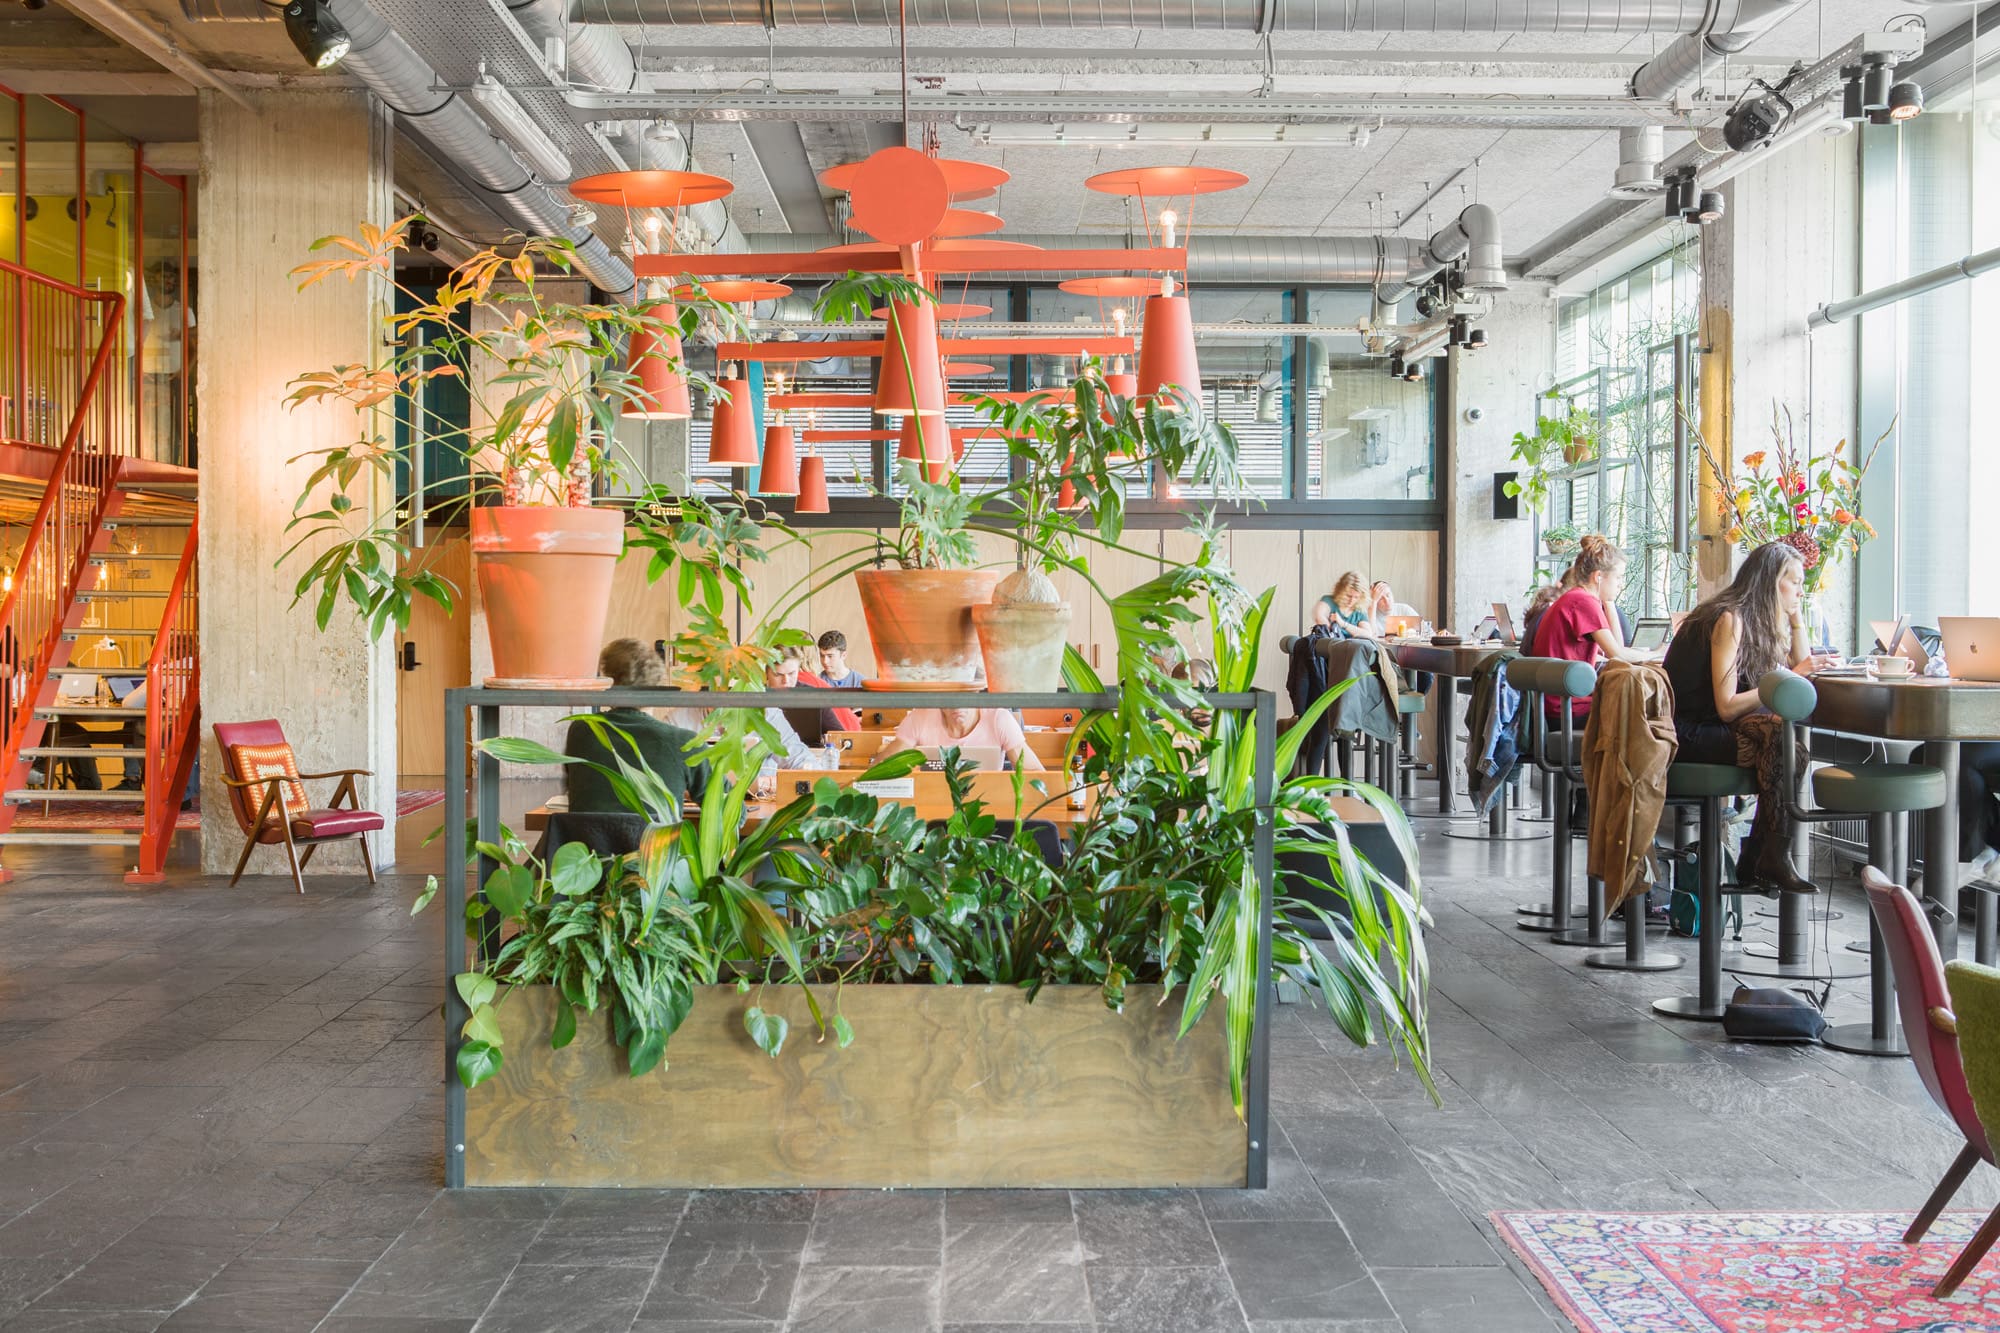 The best co-working spaces in Amsterdam for remote working | Orange lamps hang over a plant bed with people working in the background.